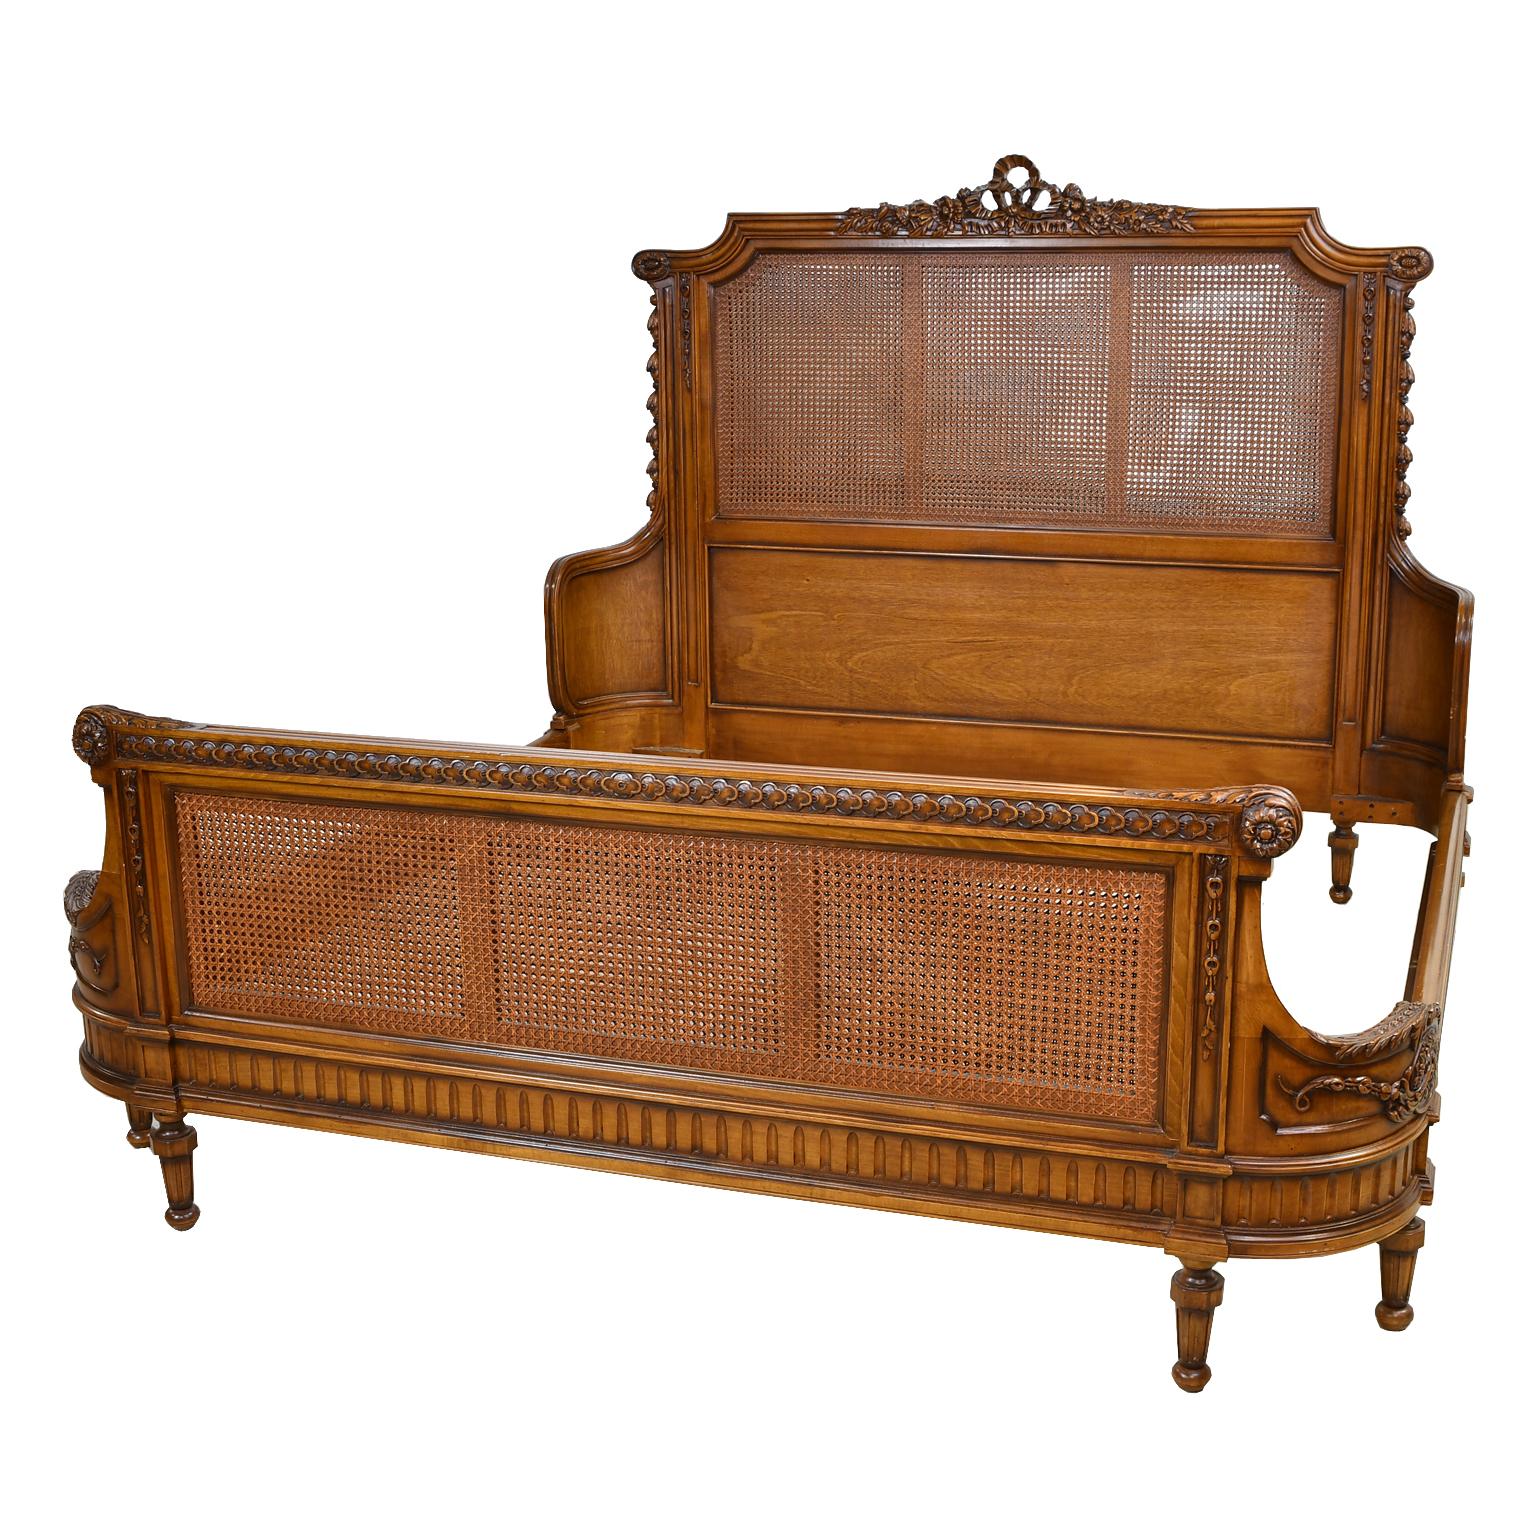 Egyptian Louis XVI Style King Size Bed with Walnut-Colored Wood Frame and Woven Caning